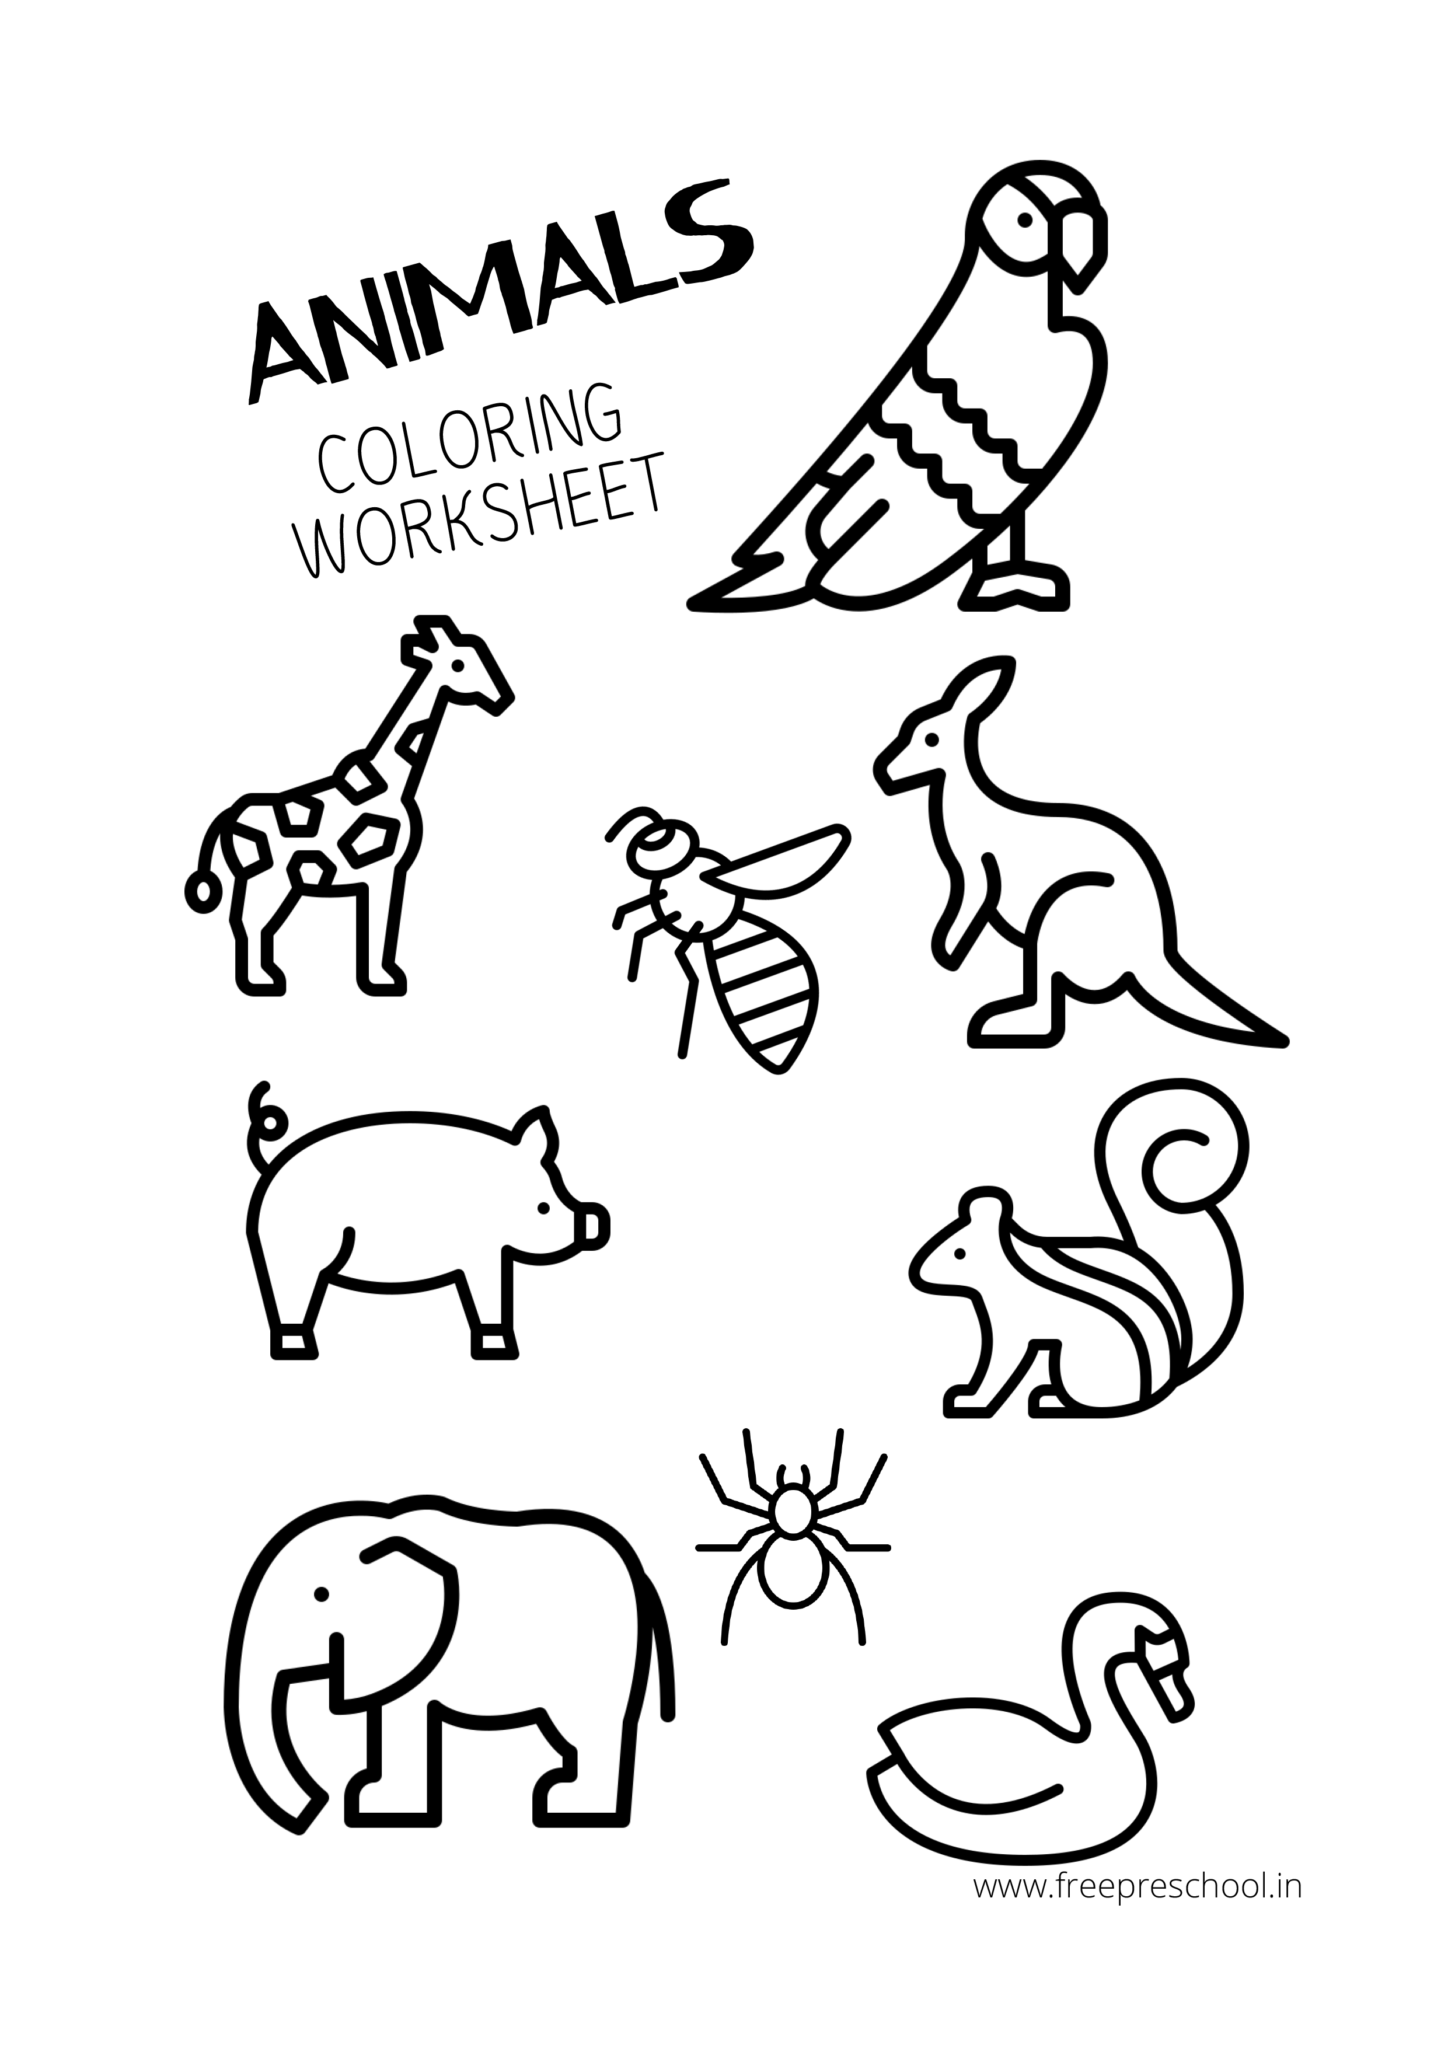 coloring-book-art-free-printable-animals-best-review